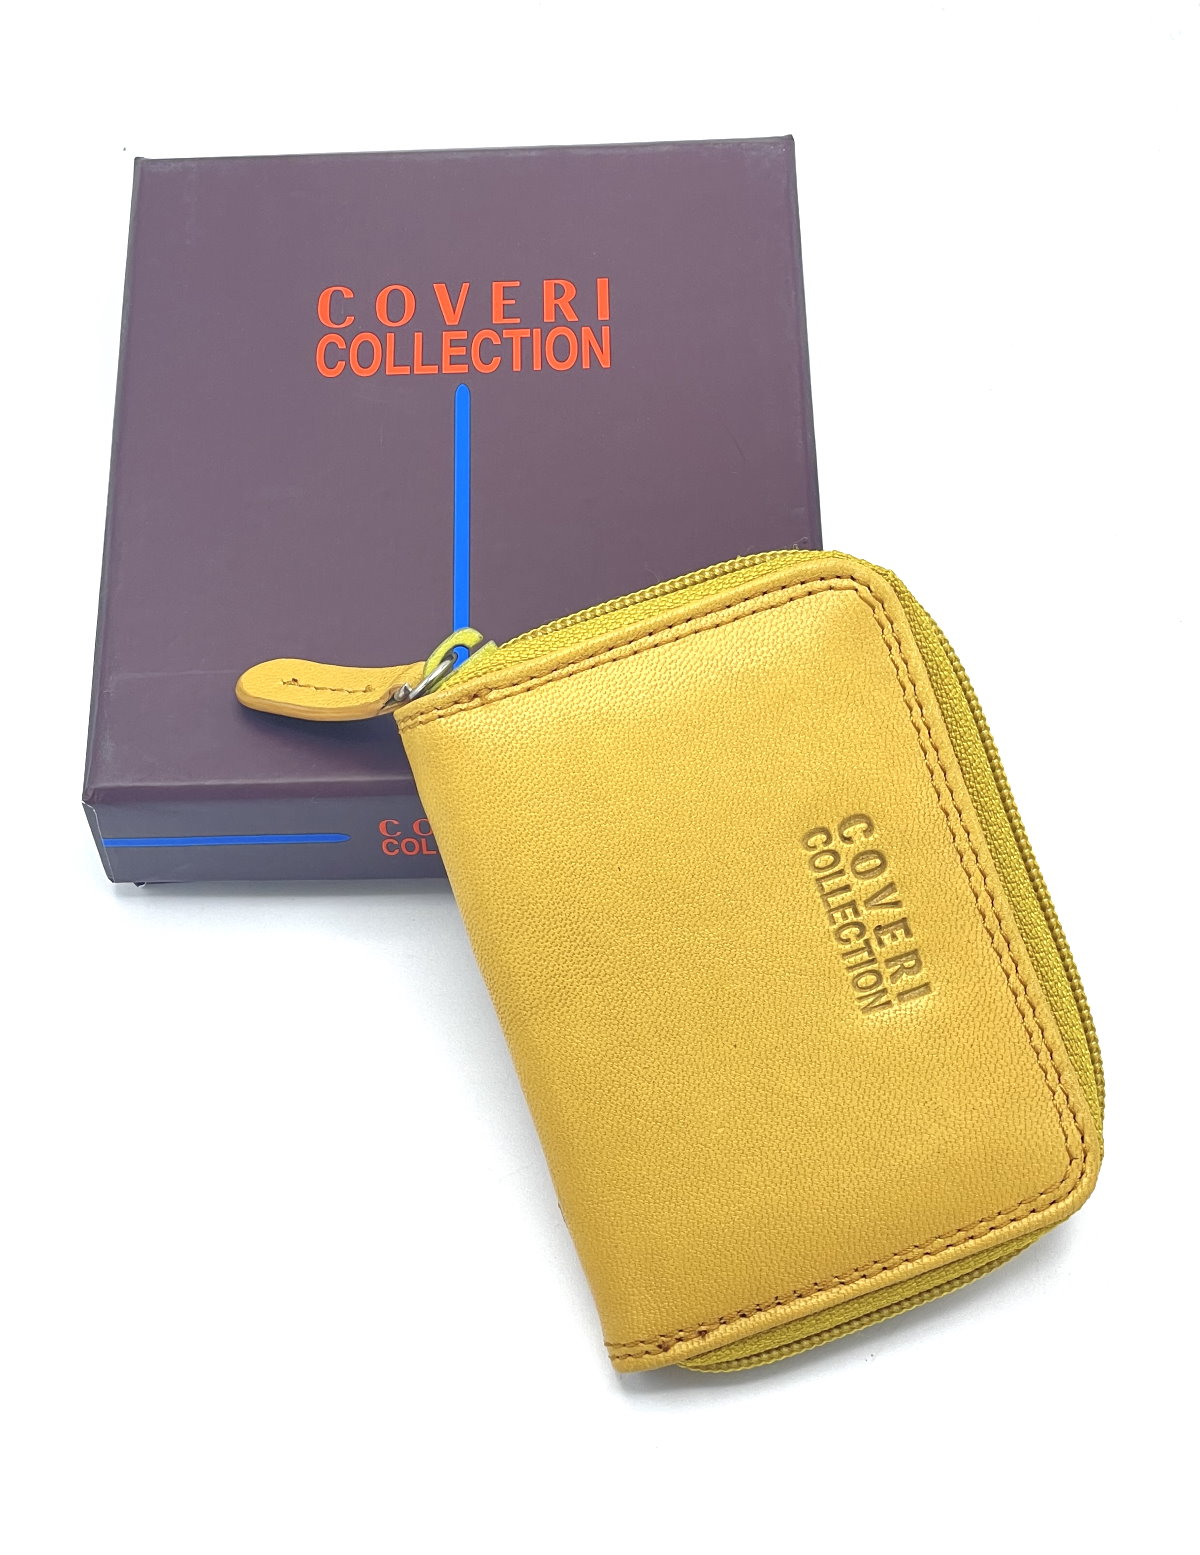 Genuine leather card holder, Brand Coveri Collection, art. 10711229.336